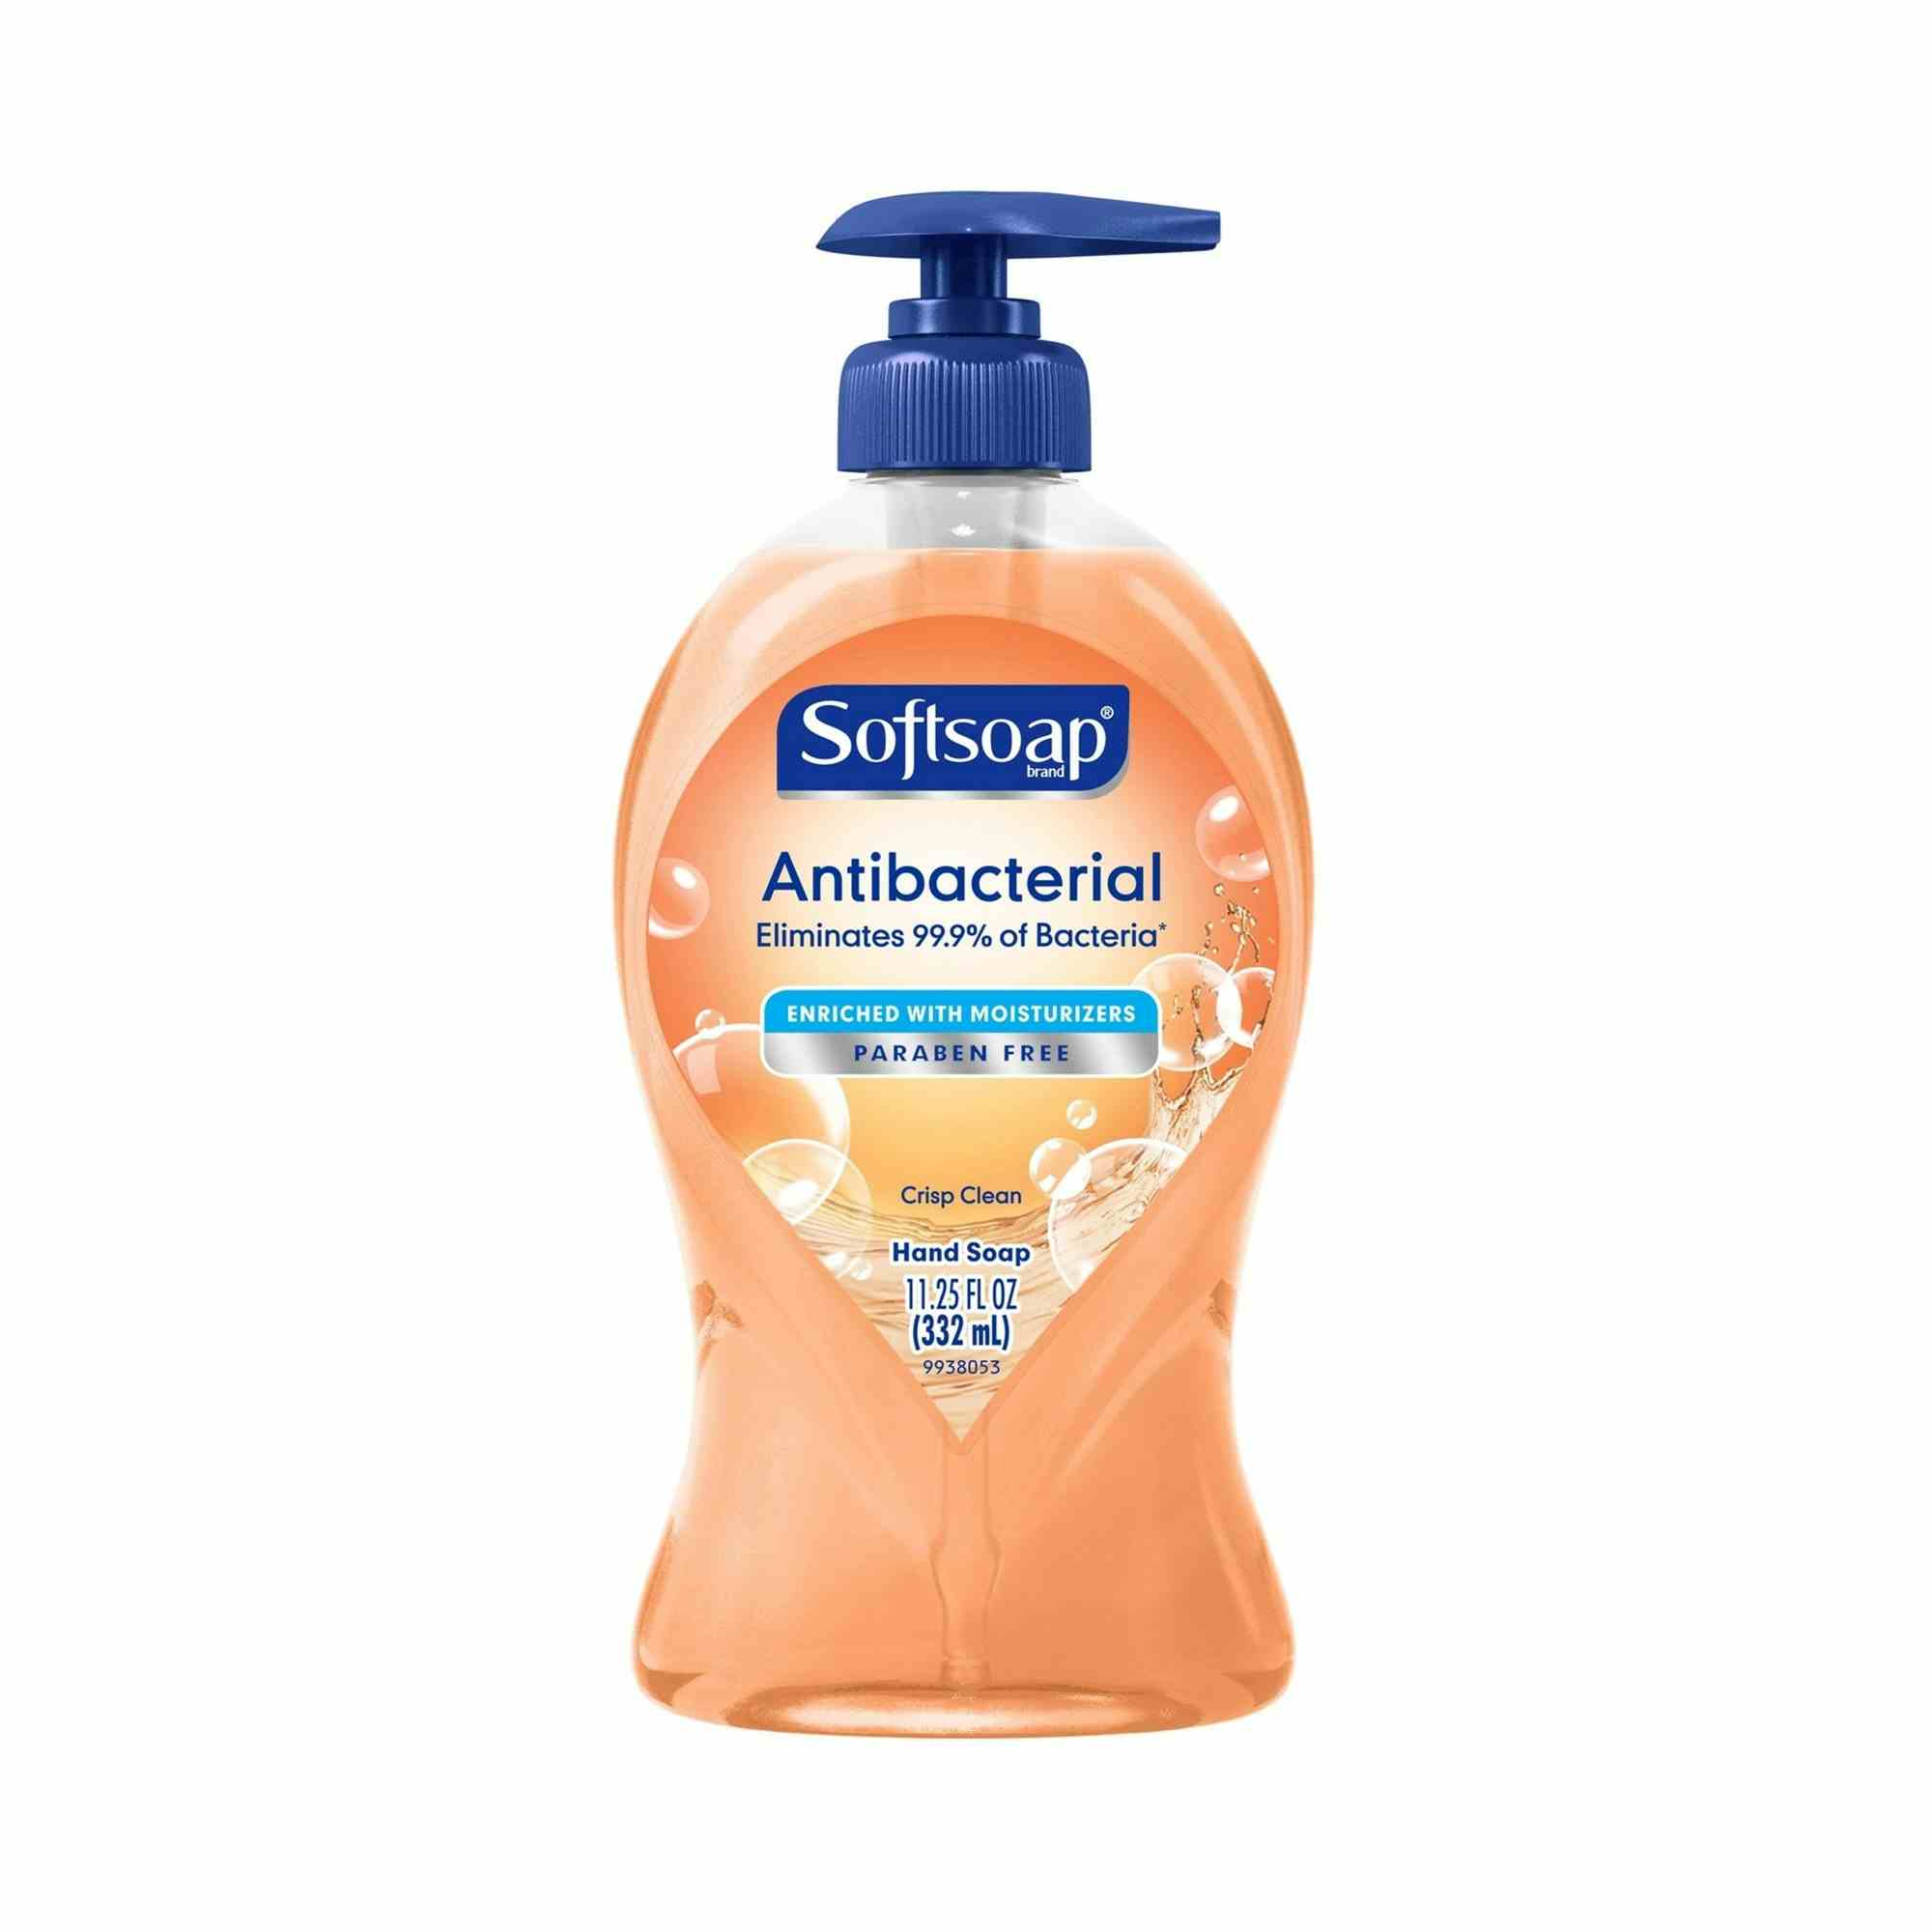 Softsoap Antibacterial Soap, US03562A, 1 Each